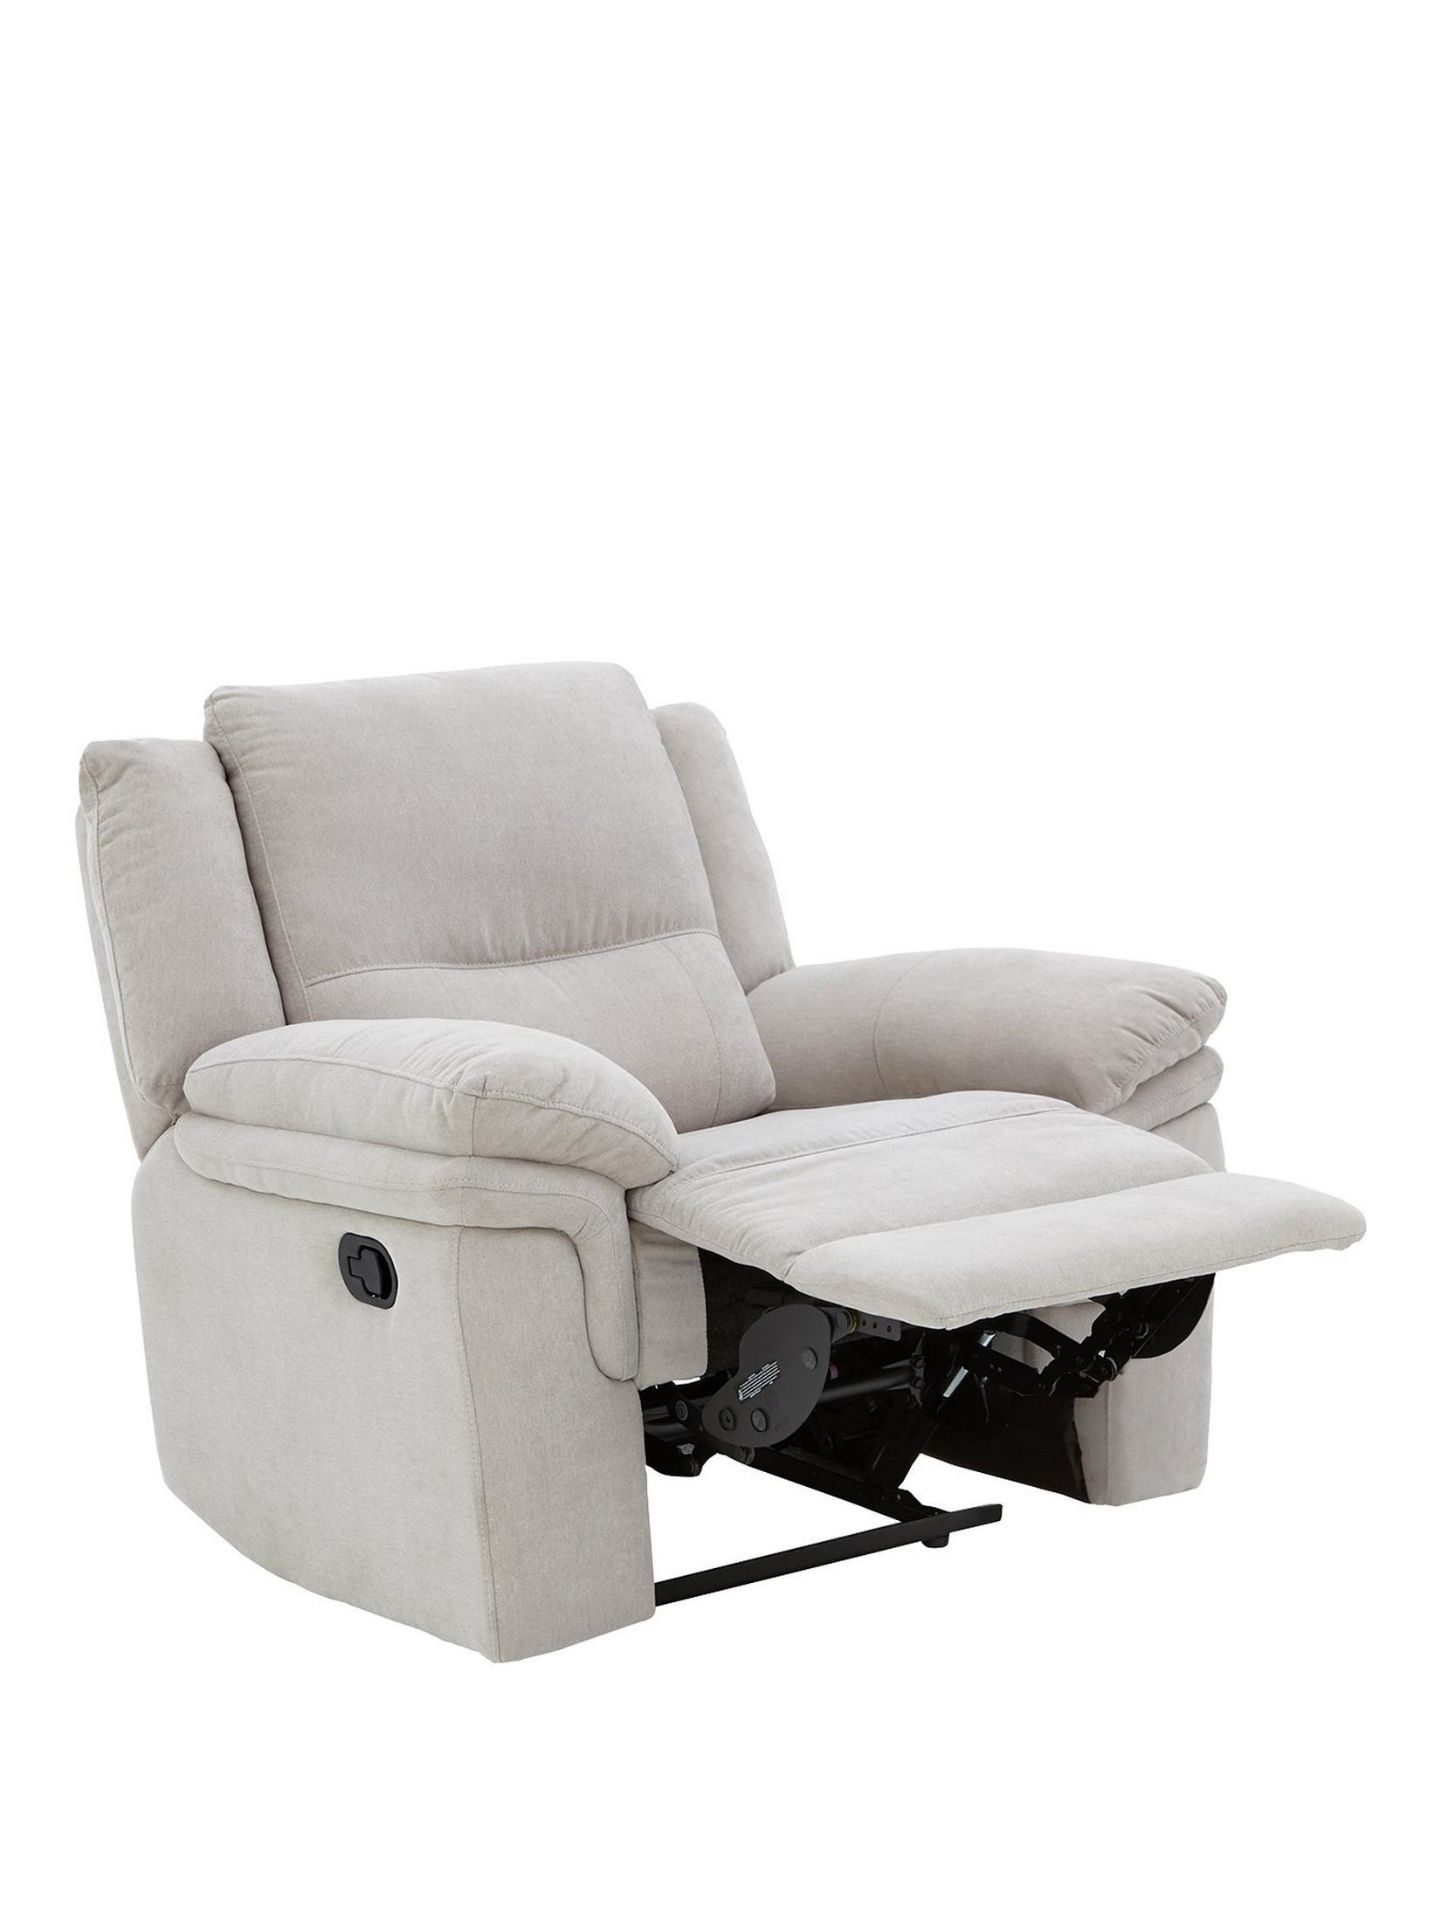 Albion Fabric Manual Recliner Chair. RPP £479.00. Irresistible texture Soft and buttery, the lightly - Image 2 of 2